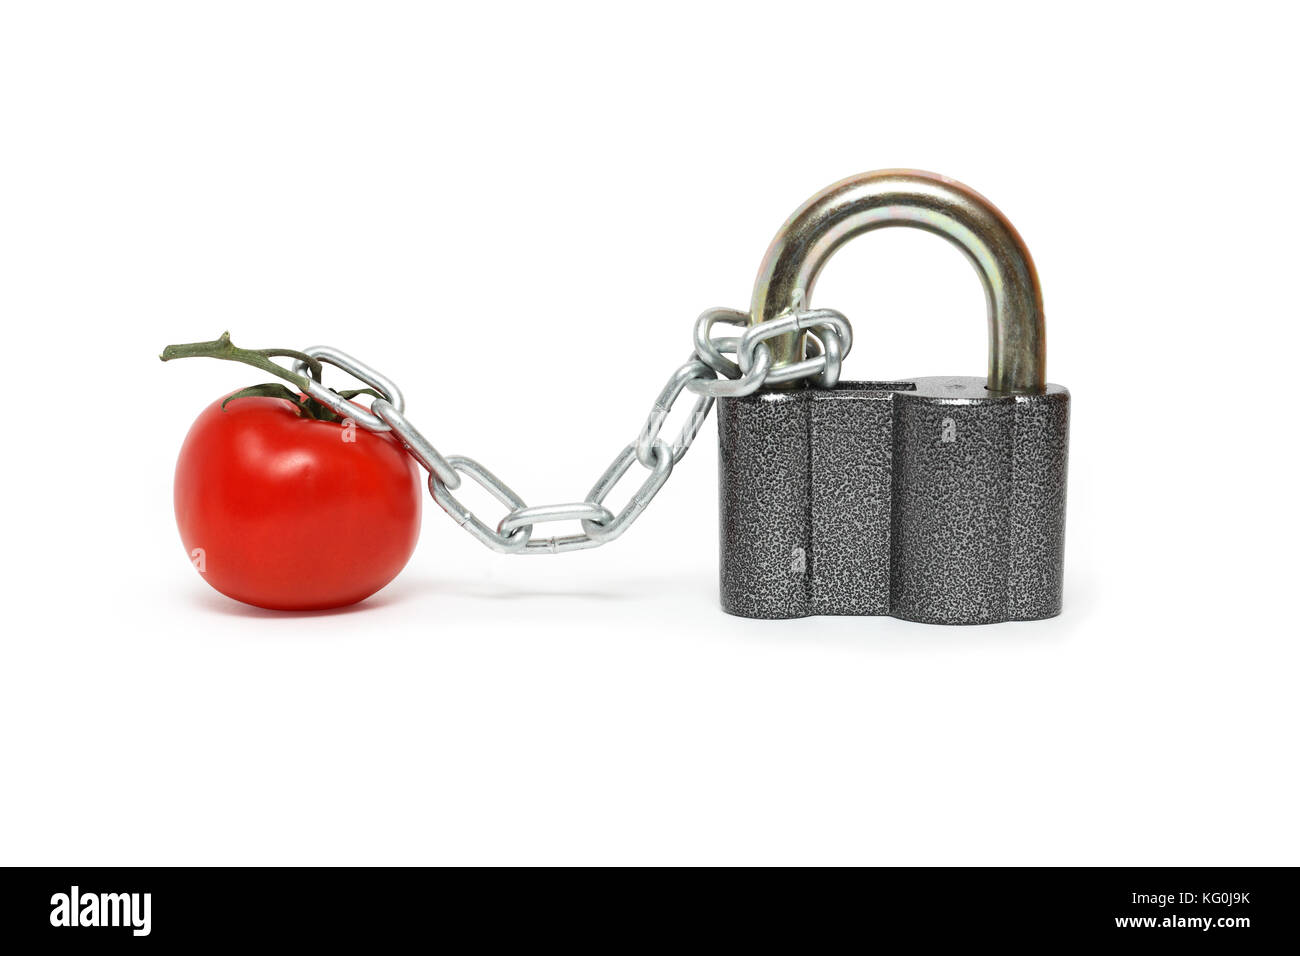 Fresh tomato attached to padlock with metal chain. Isolated on white with clipping path Stock Photo